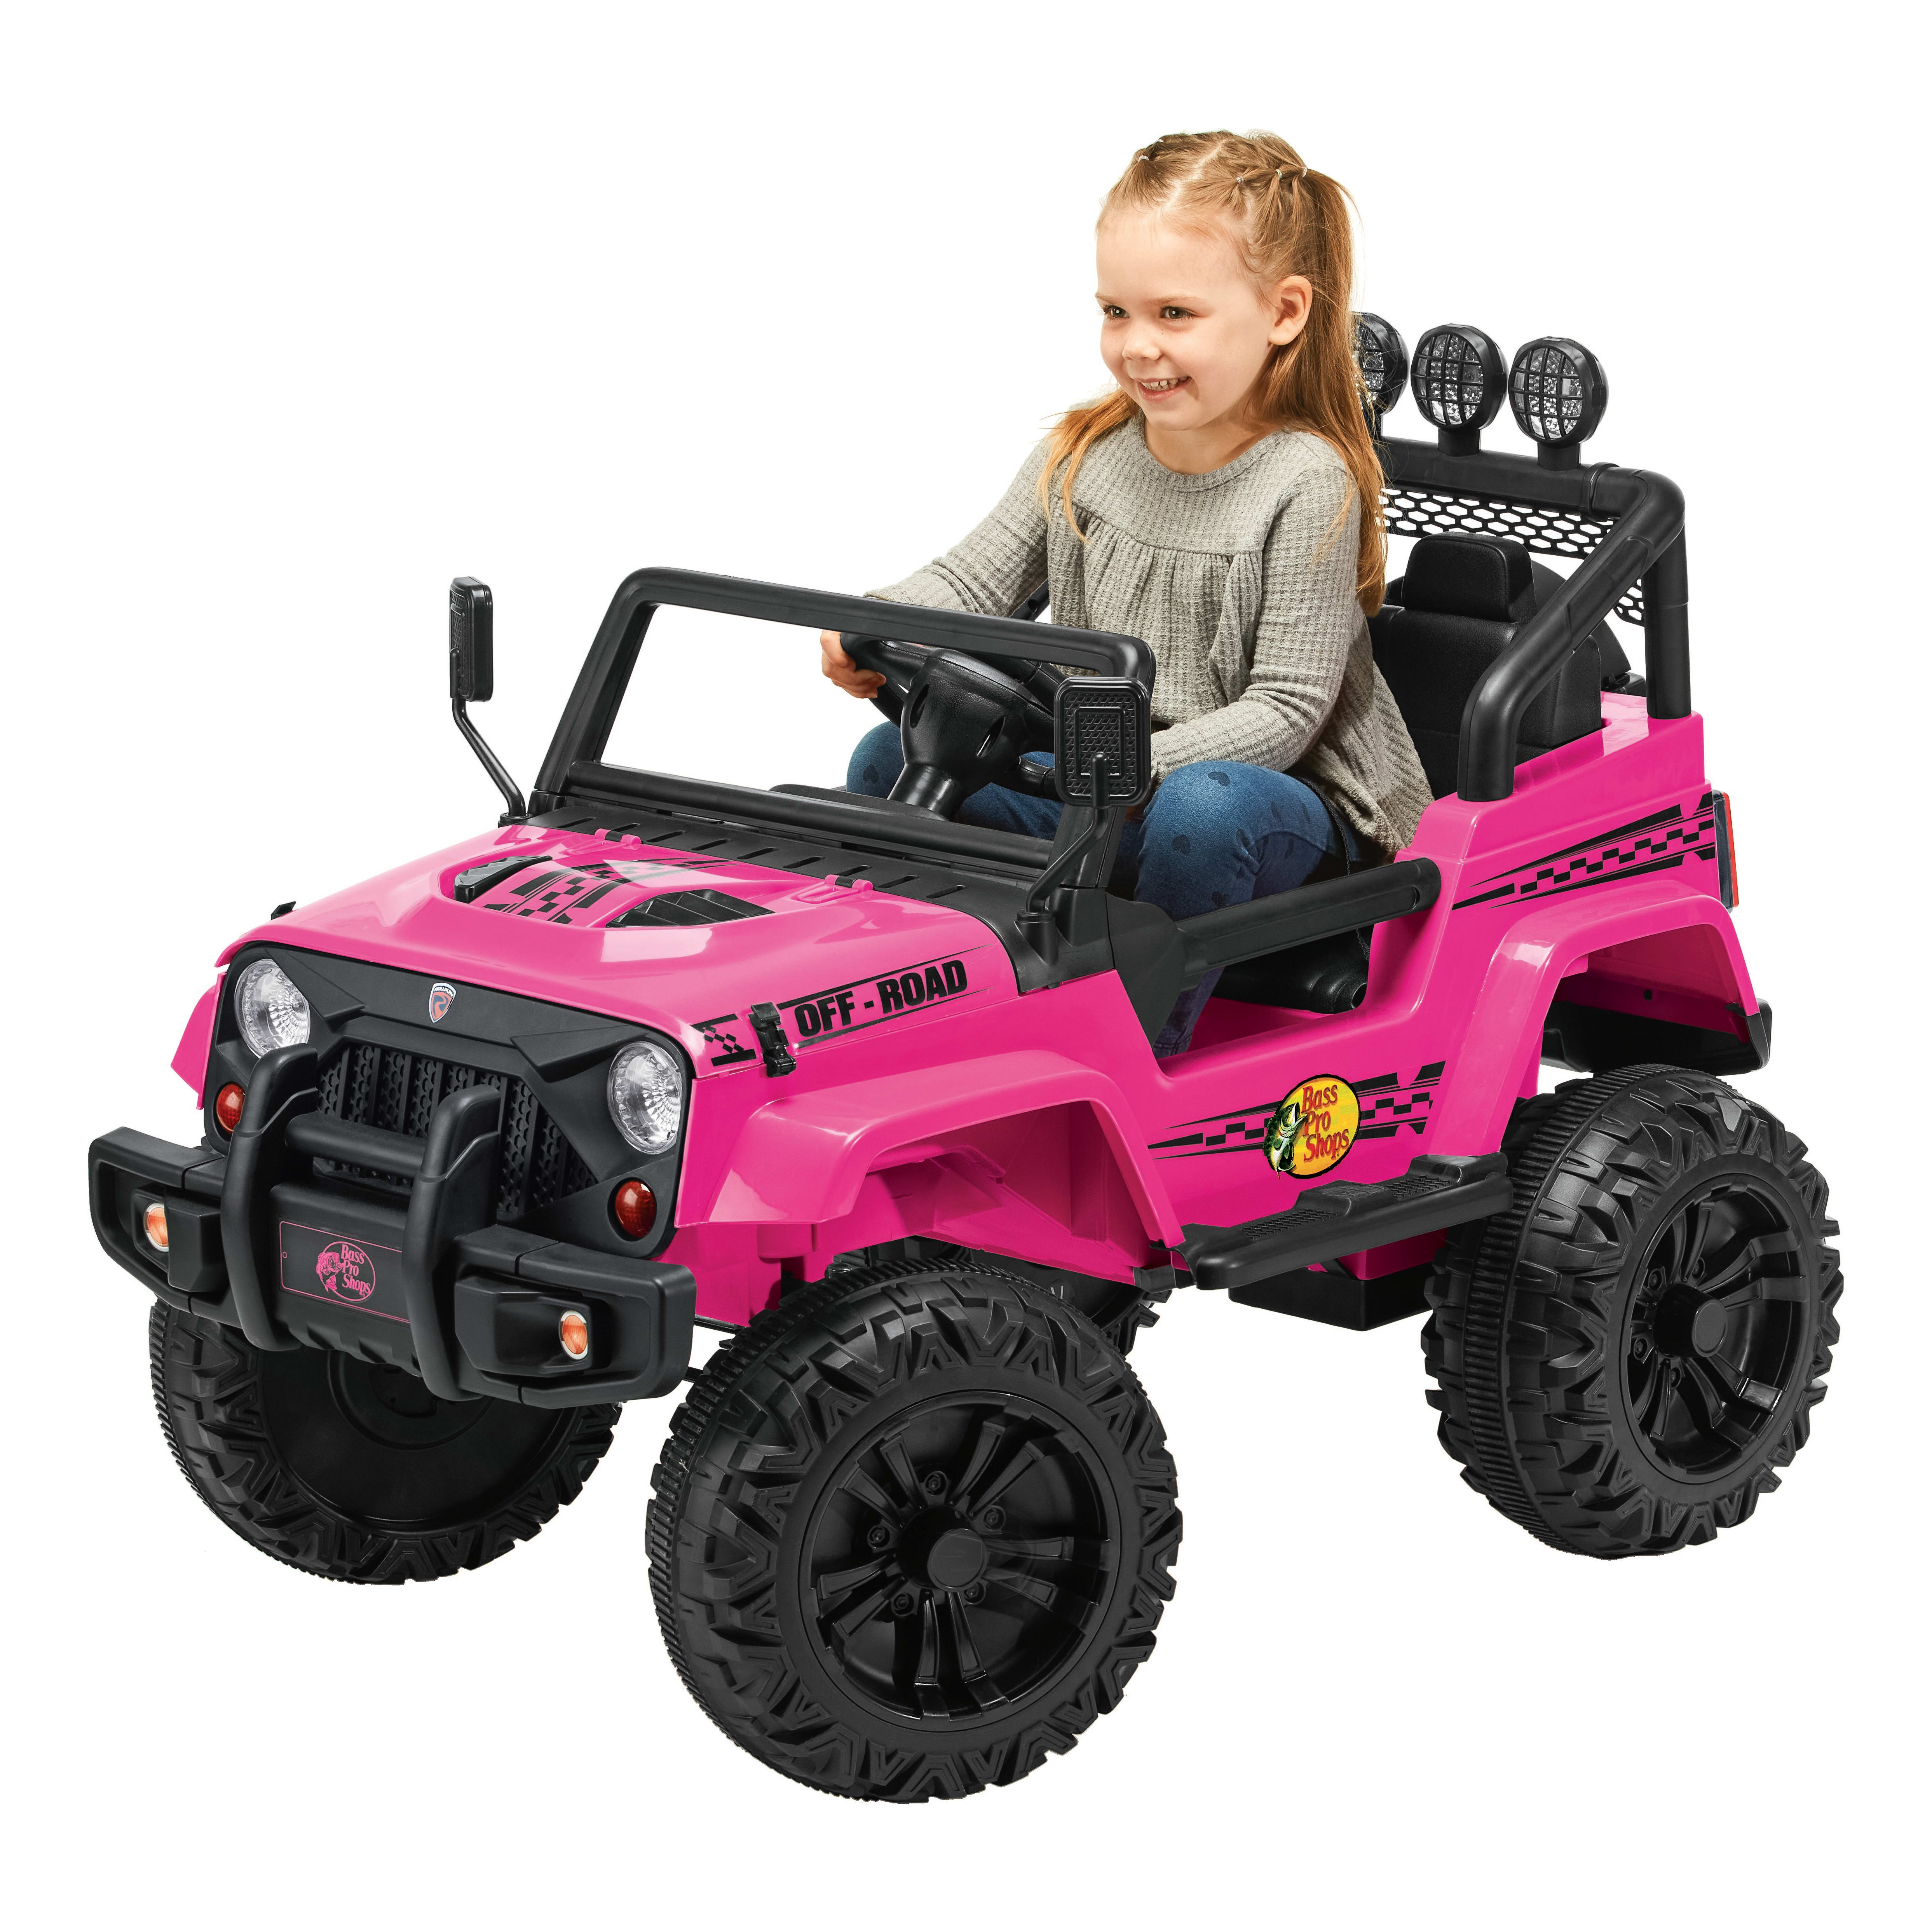 Bass Pro Shops® Powersport Trail Thunder 12V Battery-Powered Ride-On Truck - Pink